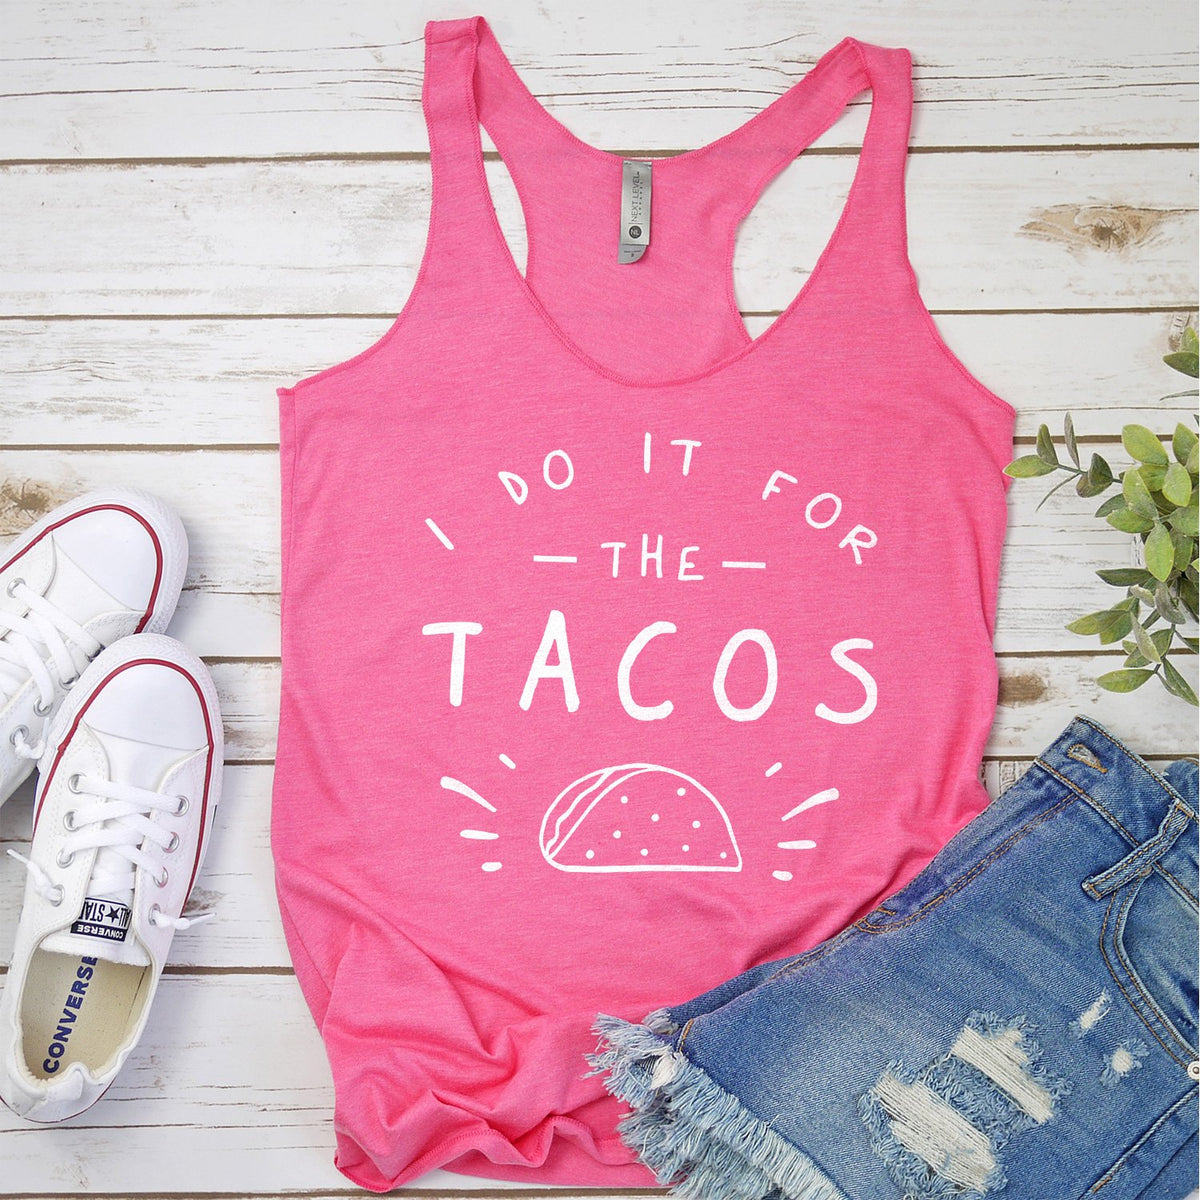 I Do It For The Tacos - Tank Top Racerback